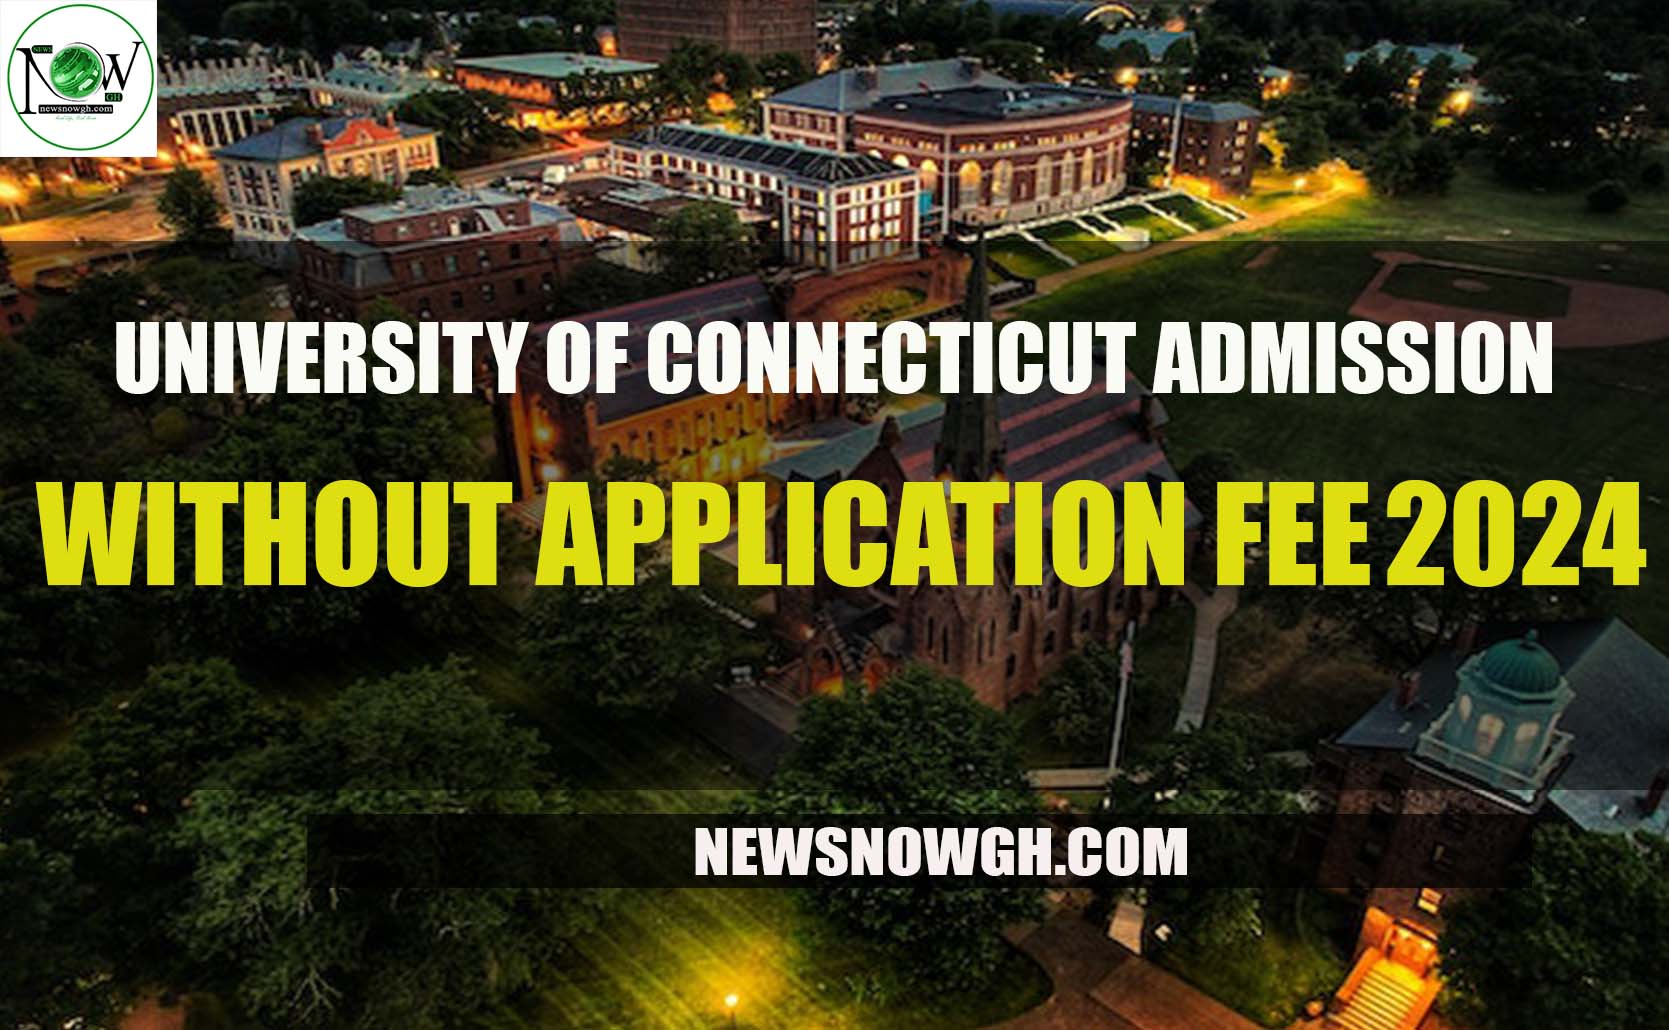 University of Connecticut admissions without application fee for 202425